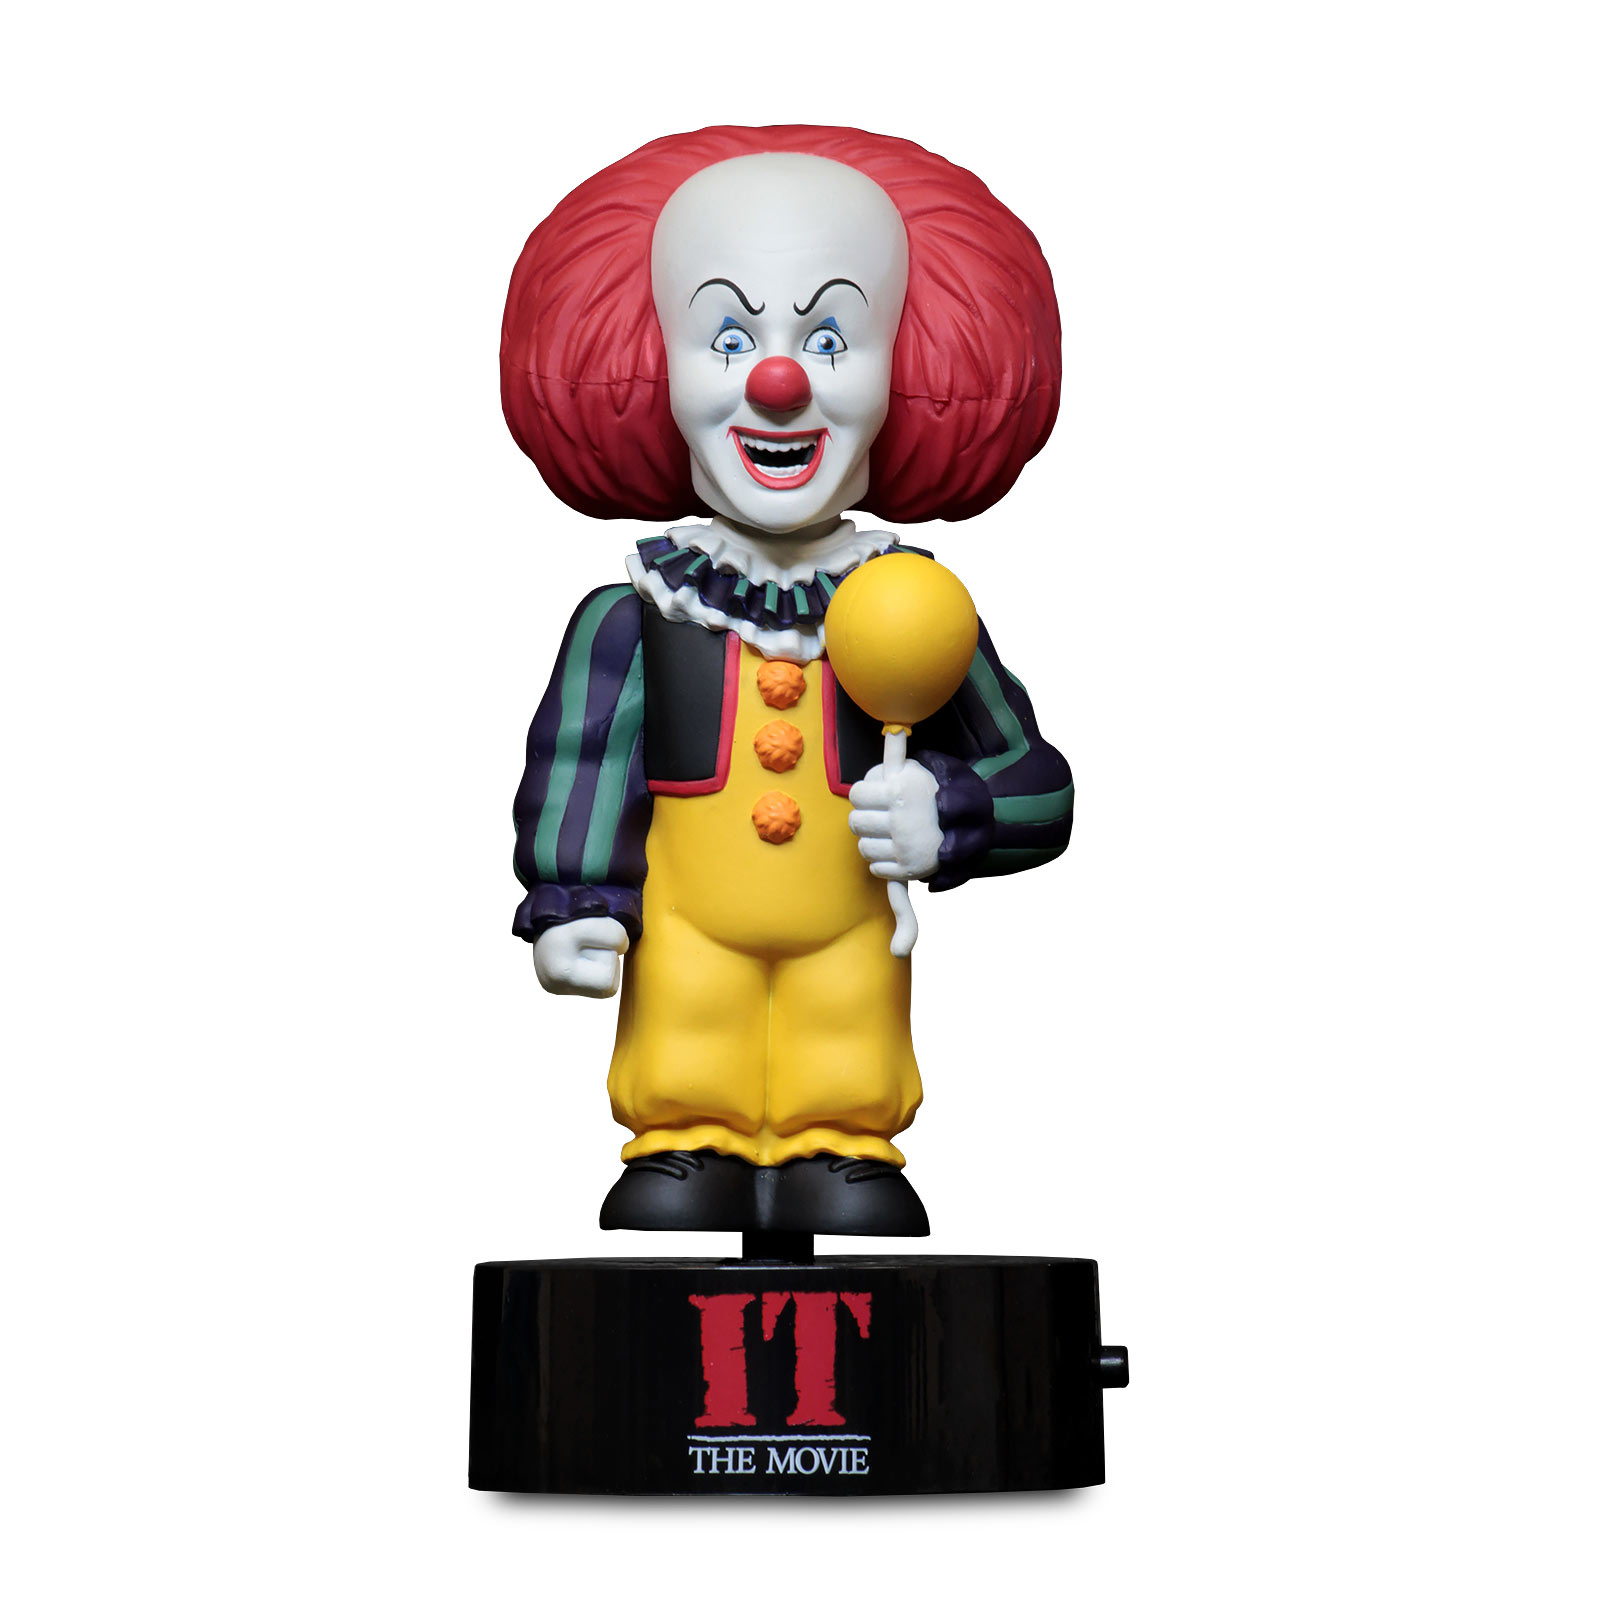 Stephen King's IT - Pennywise 1990 Body Knockers Solar Bobblehead